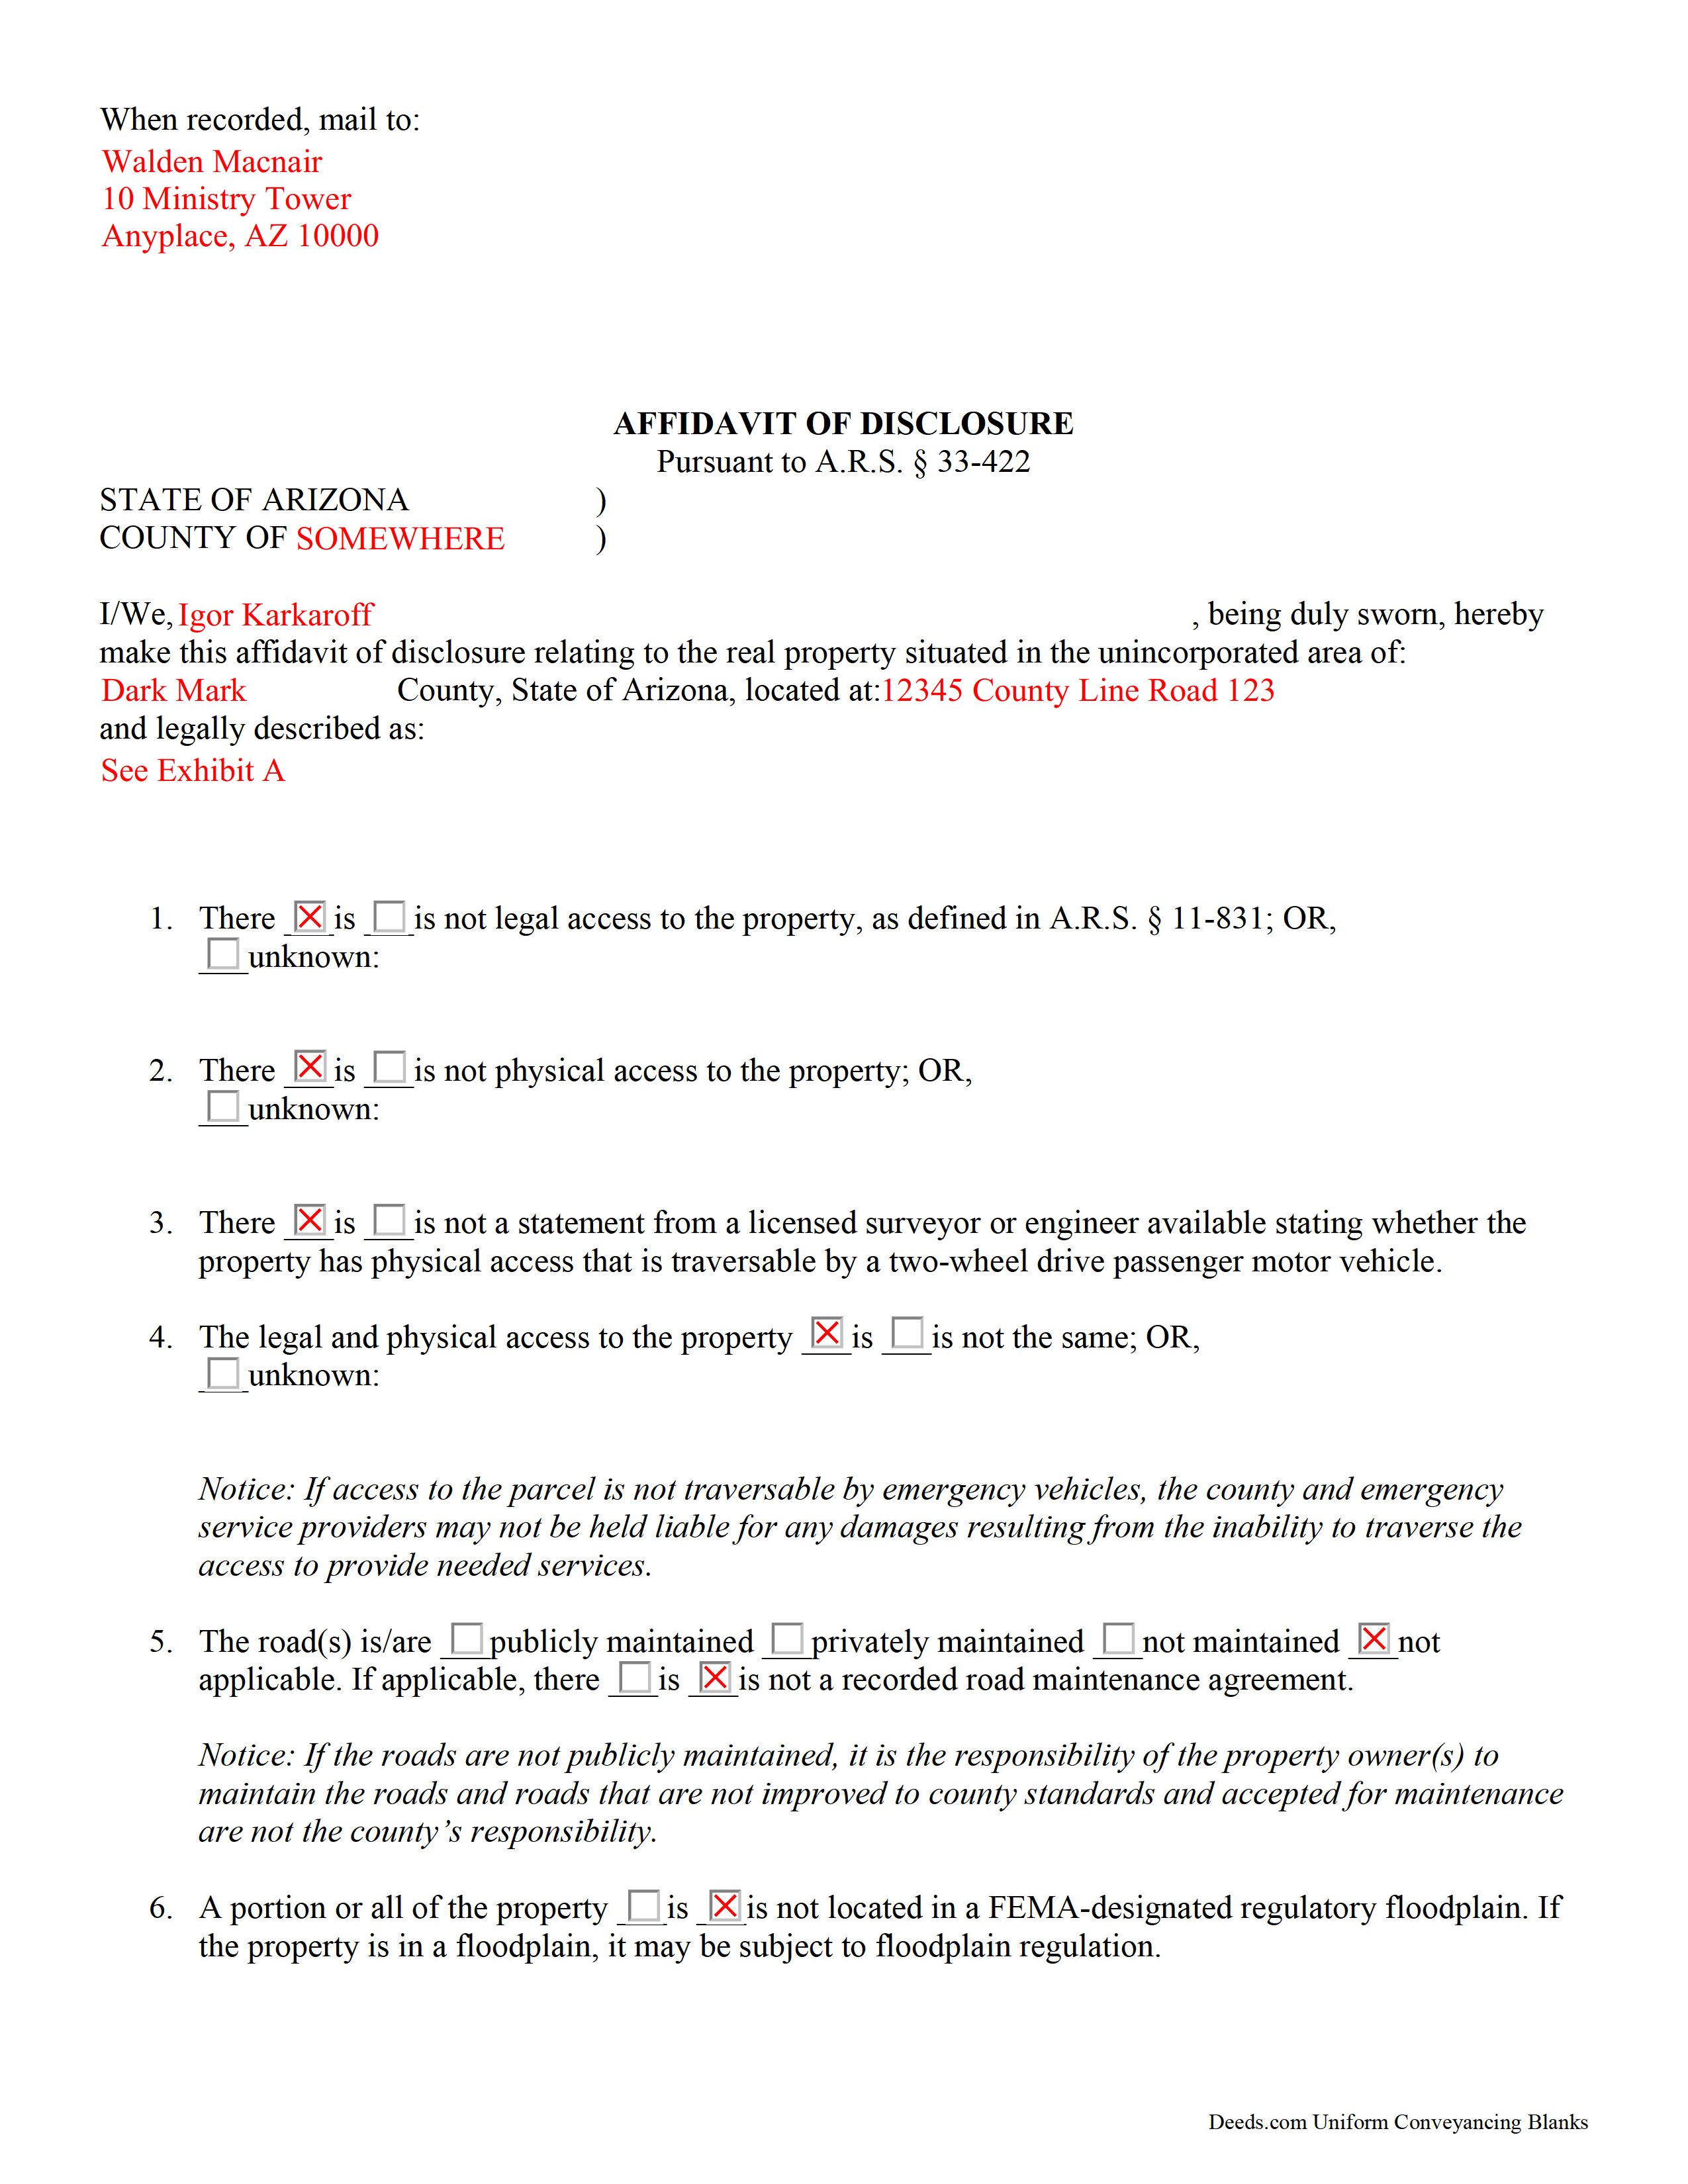 Completed Example of the Affidavit of Disclosure Document